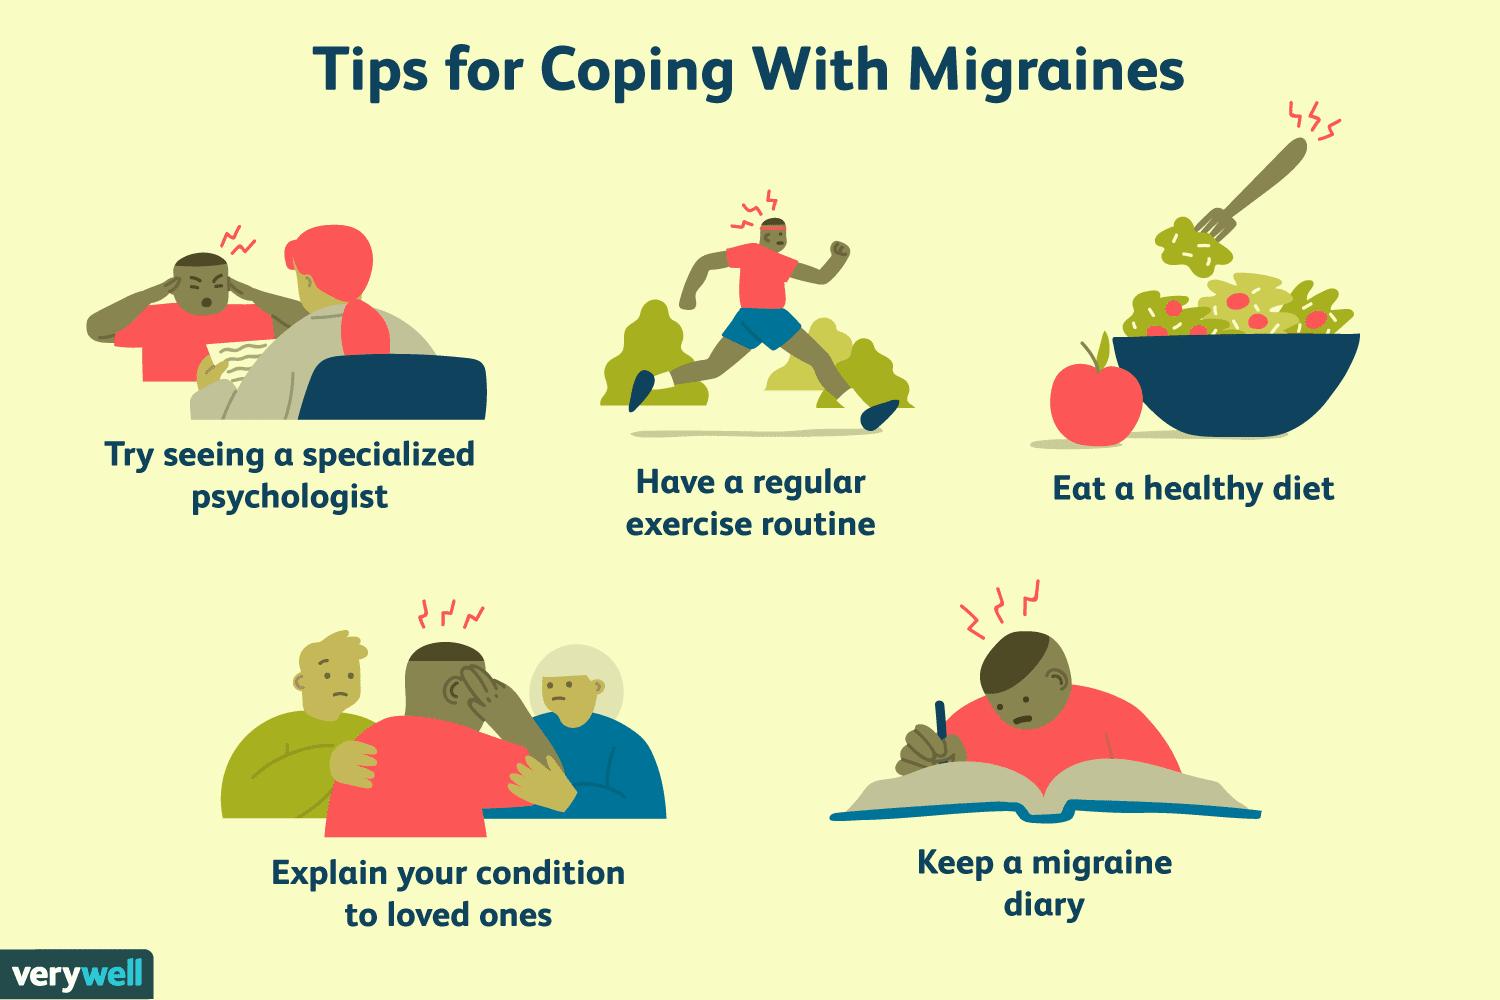 A set of 5 illustrated tips for coping with migraines: see a psychologist, have a regular exercise routine, eat a healthy diet, explain your condition to loved ones, and keep a migraine diary.